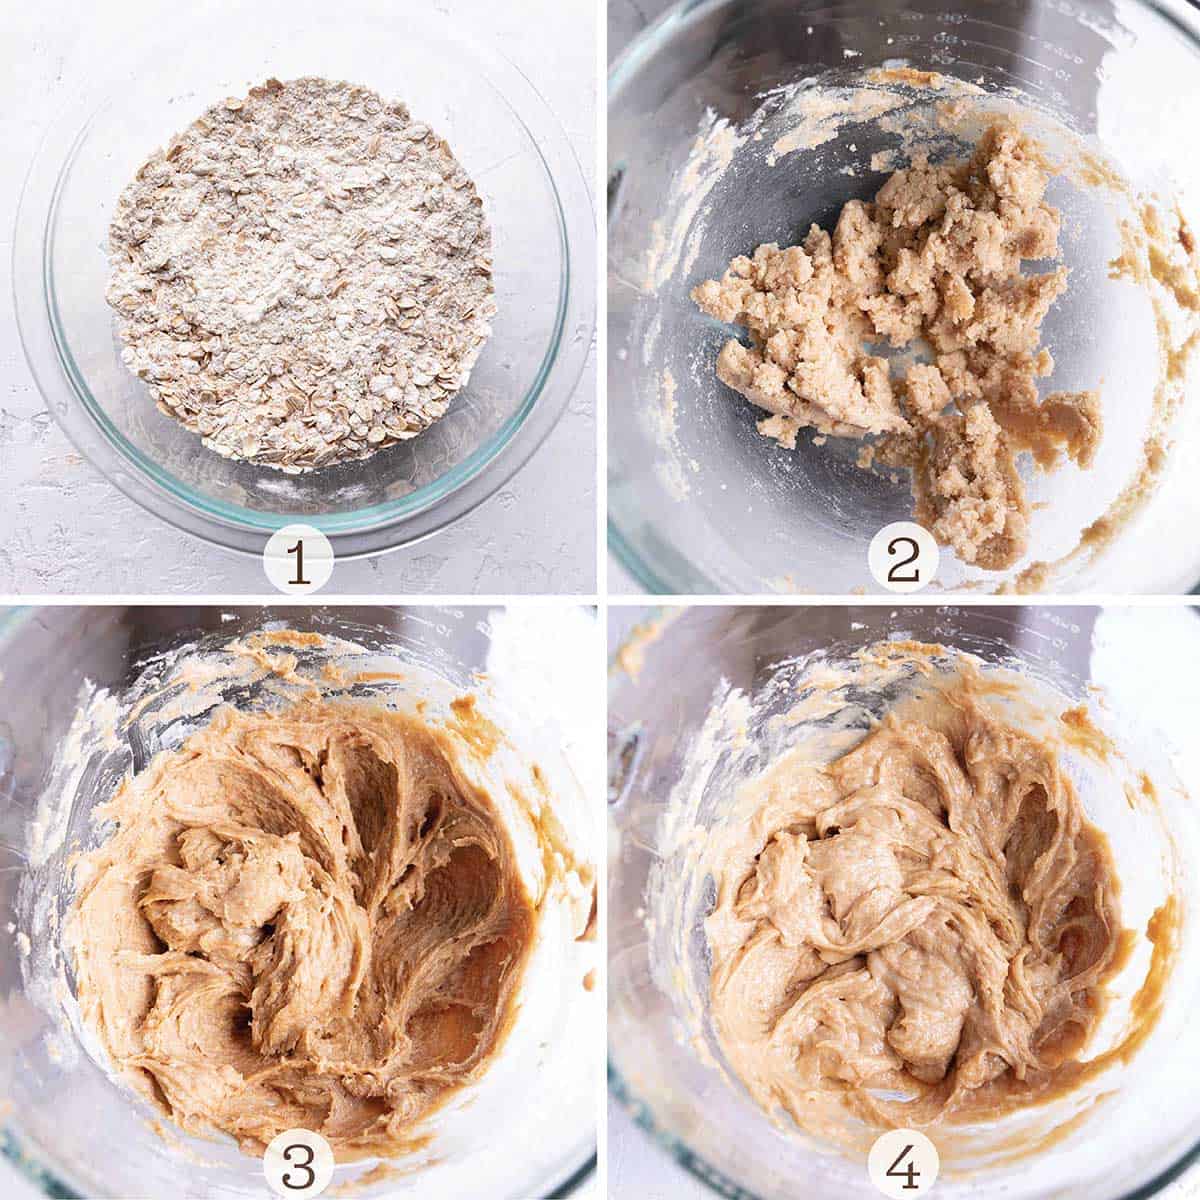 A glass bowl with a flour and oat mix and then a stand mixer with a cookie batter. 